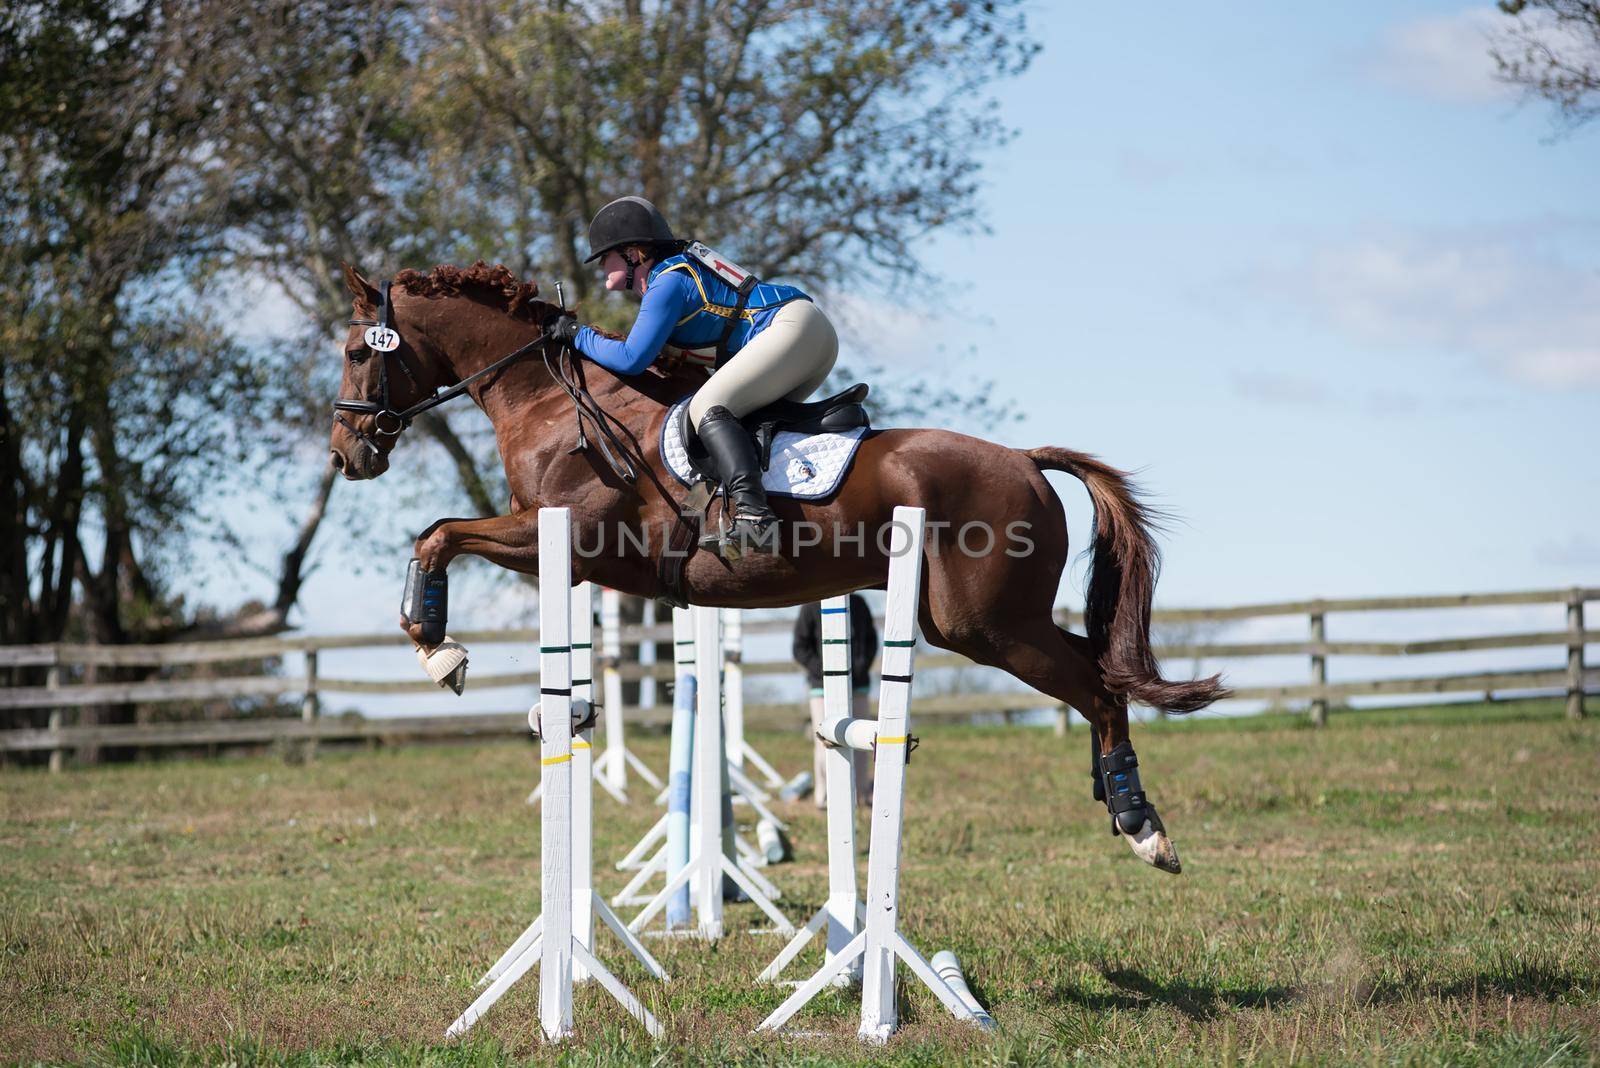 Equestrian competition photos including hunter jumper riders going over jumps